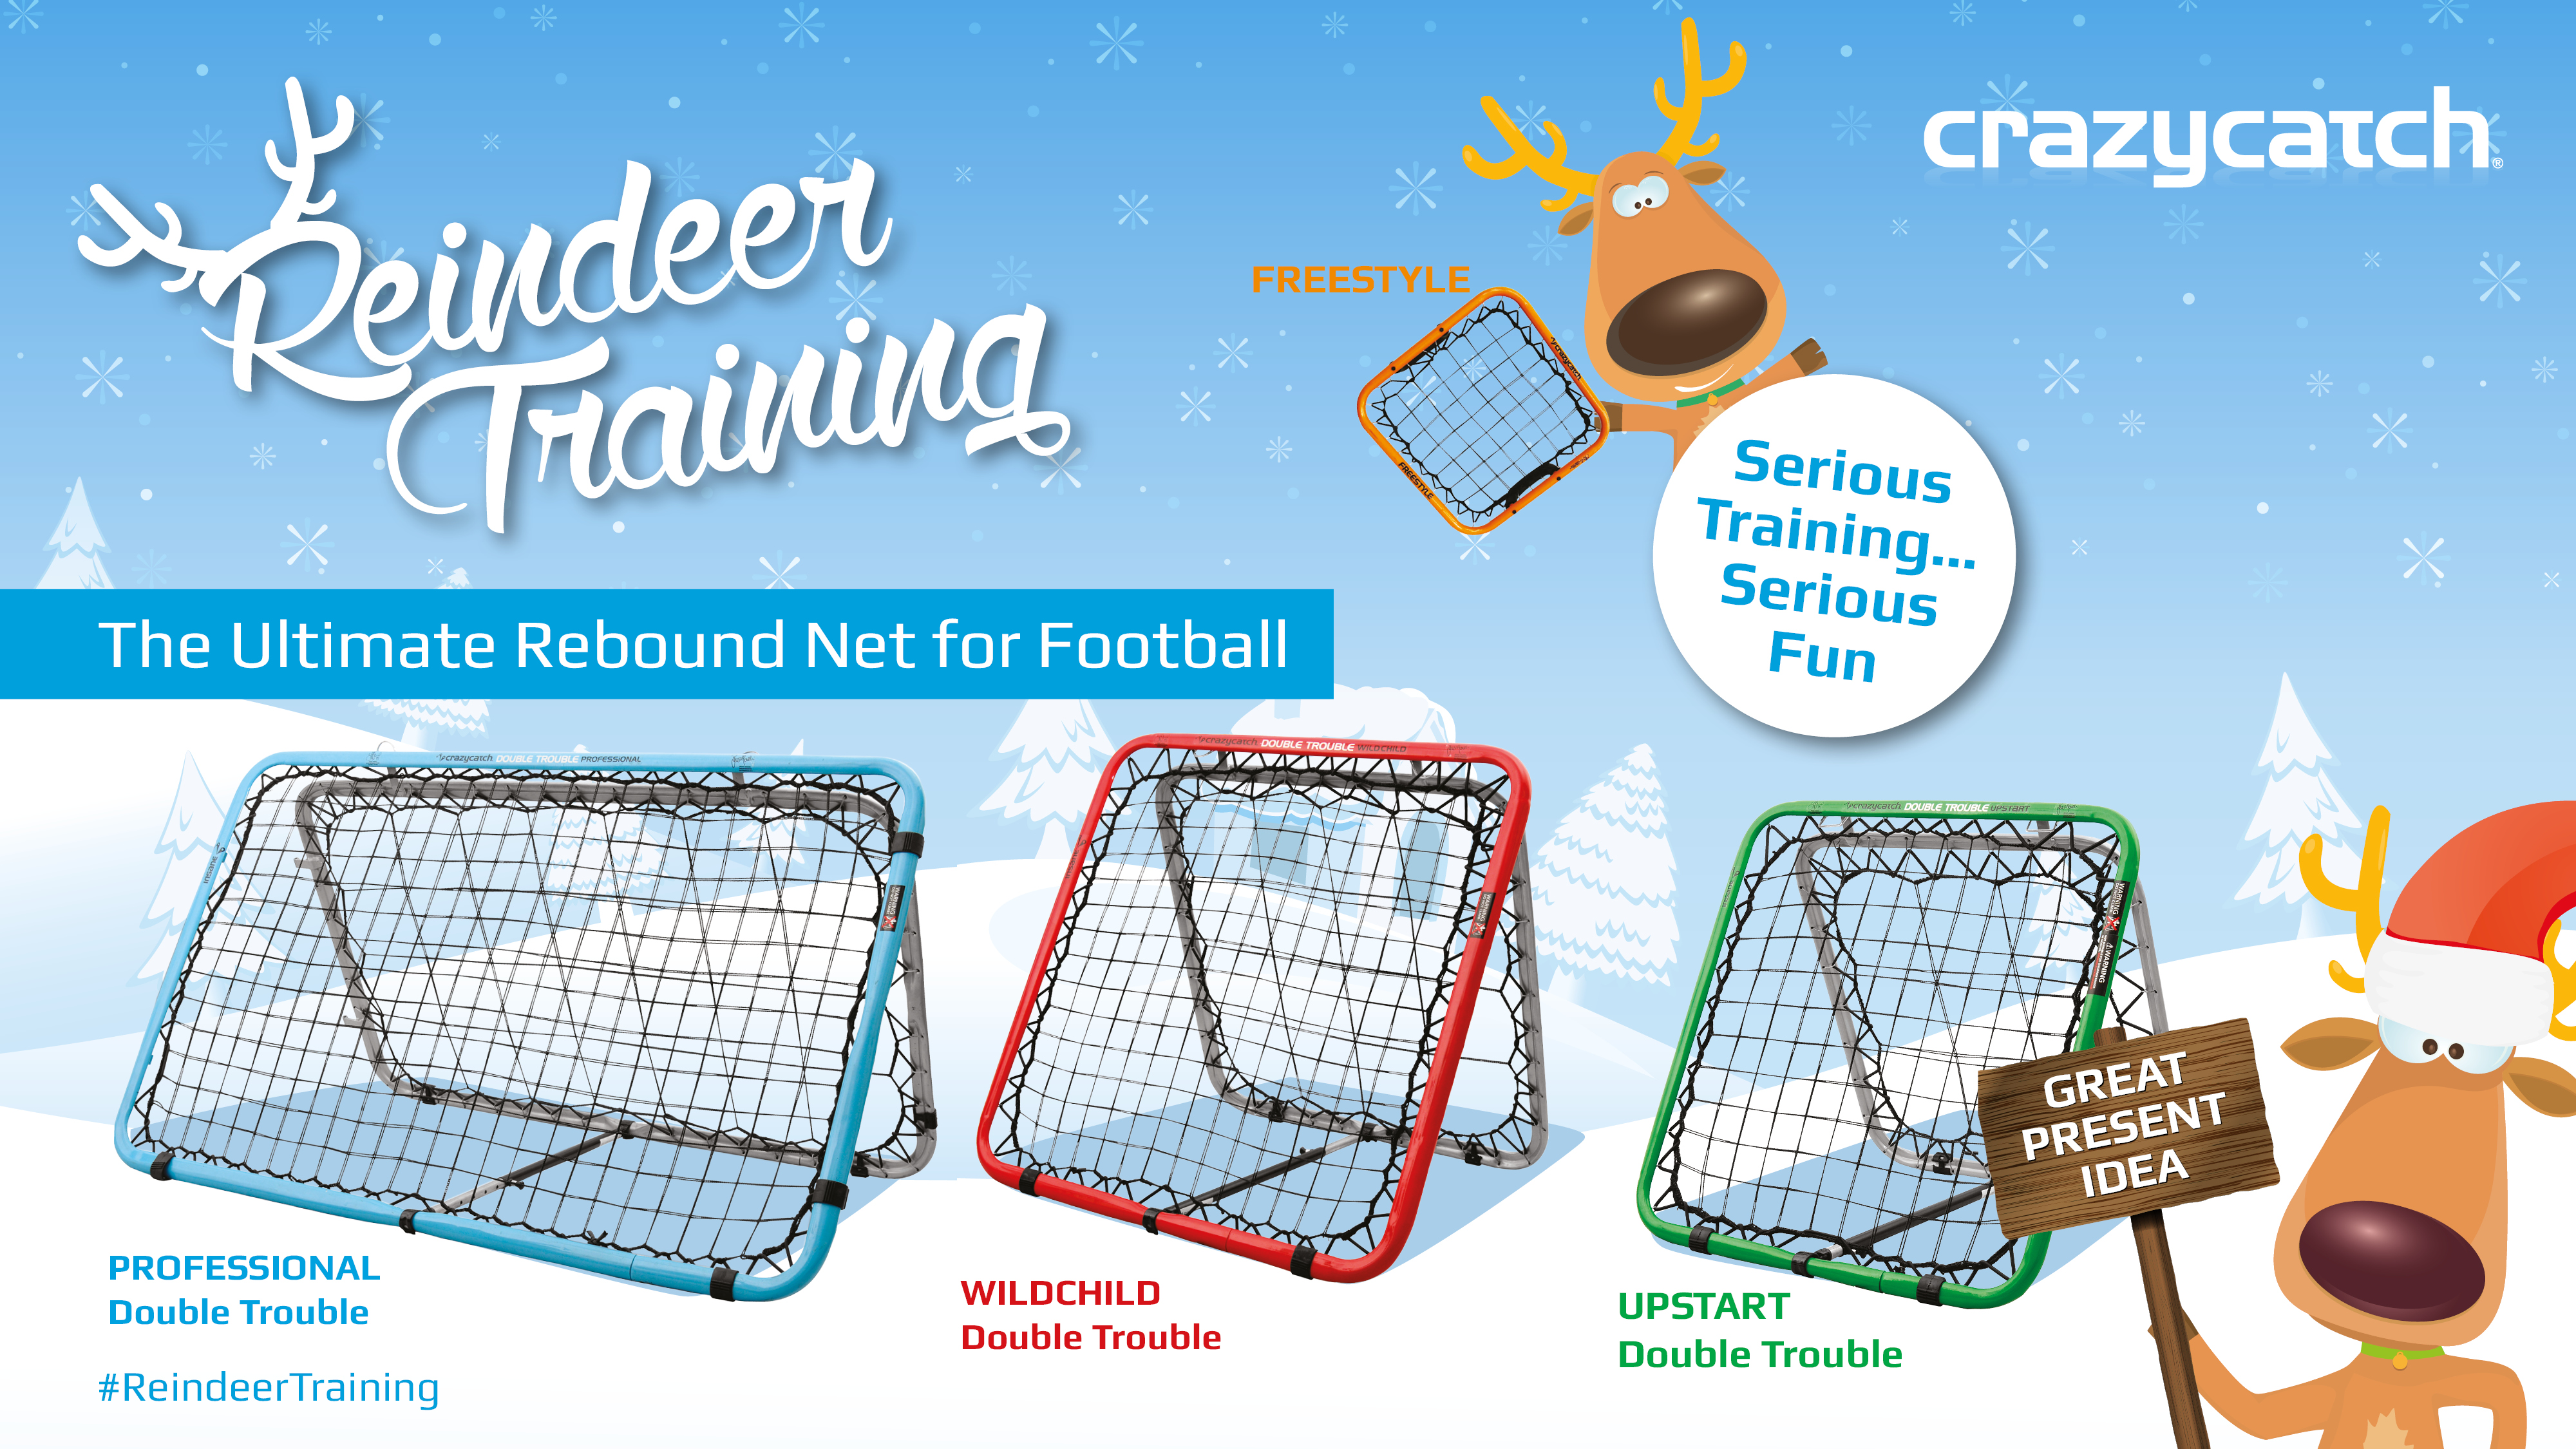 The Crazy Catch Double Trouble range for Football